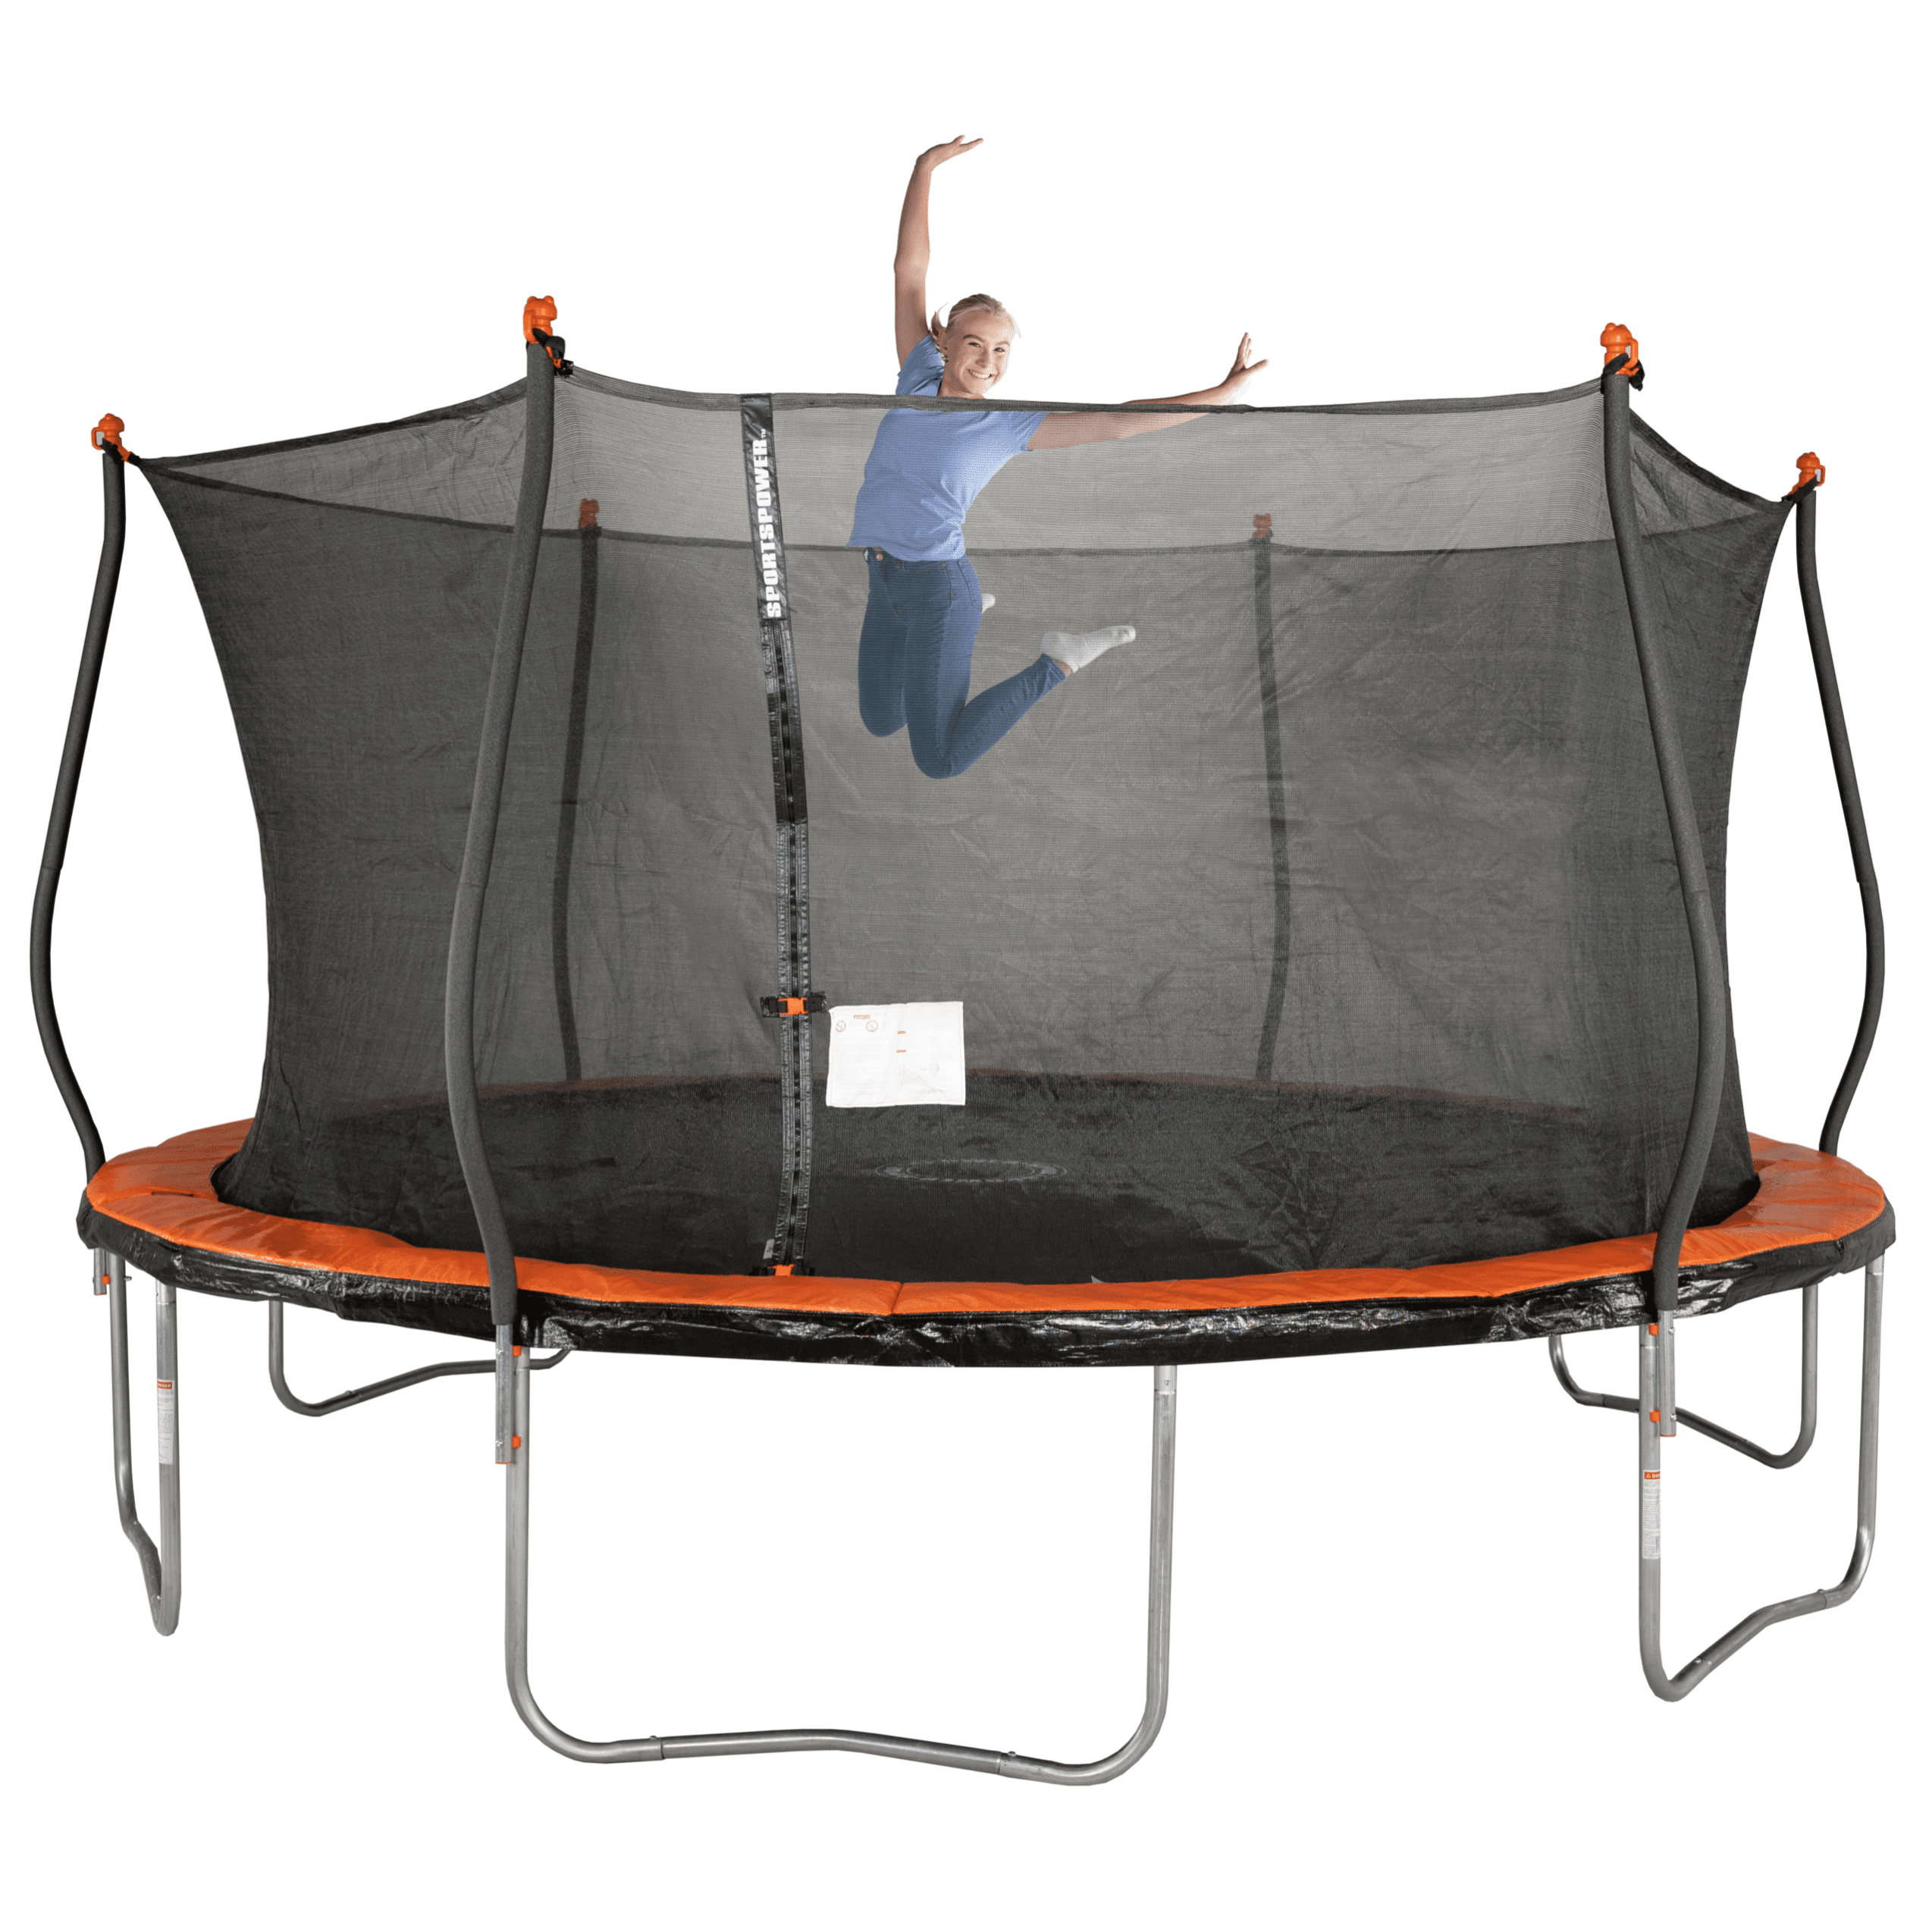 Fashionsport Outfitters Trampoline With Safety Enclosure indoor or Outdoor for sale online 